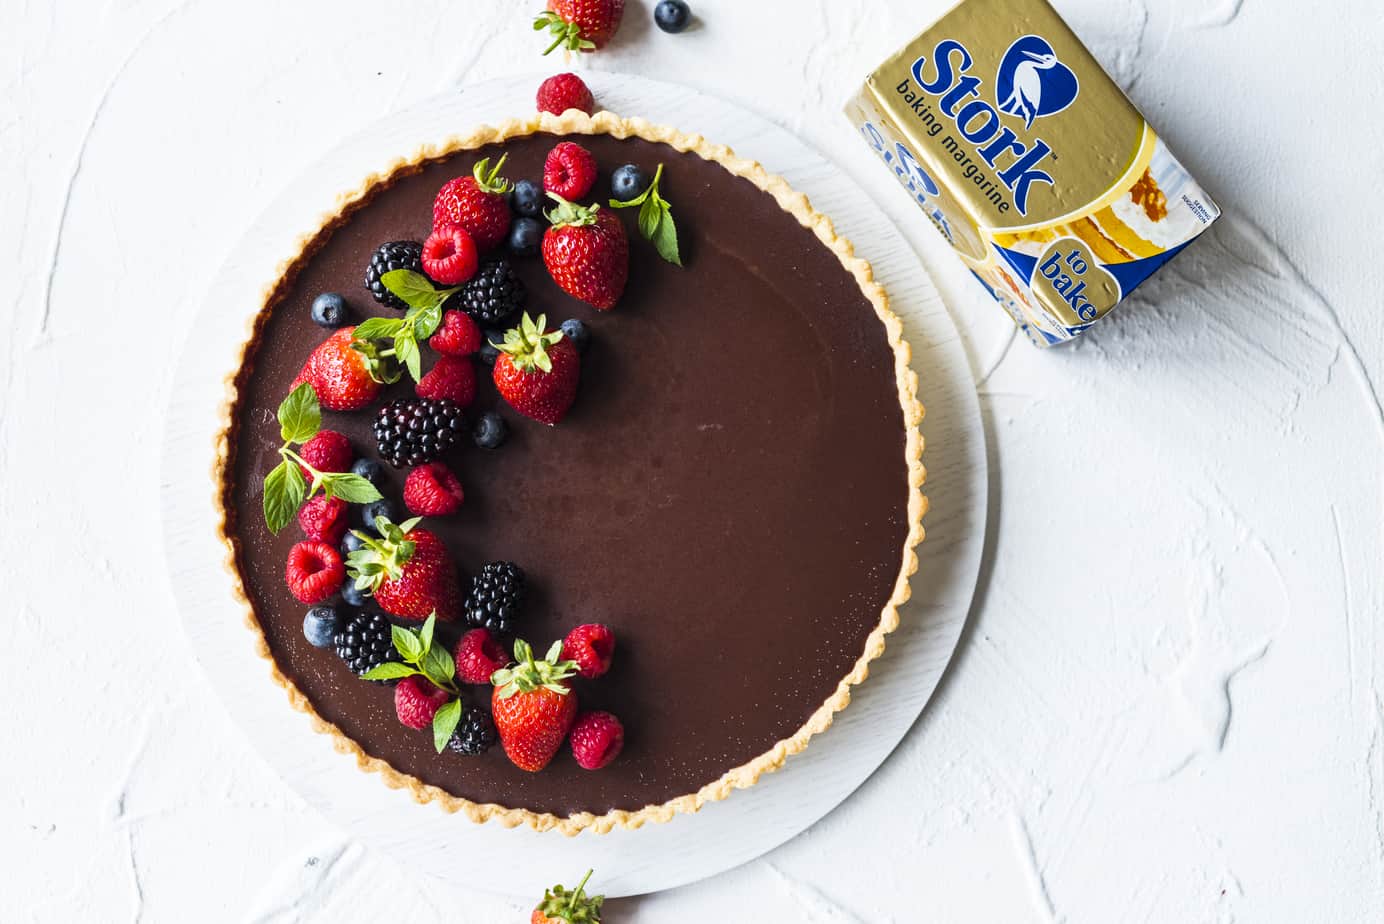 When you need a decadent yet easy dessert this Easy Chocolate Ganache Tart will become your ultimate go-to recipe. Made with dark chocolate, Stork Bake and topped with fresh berries.